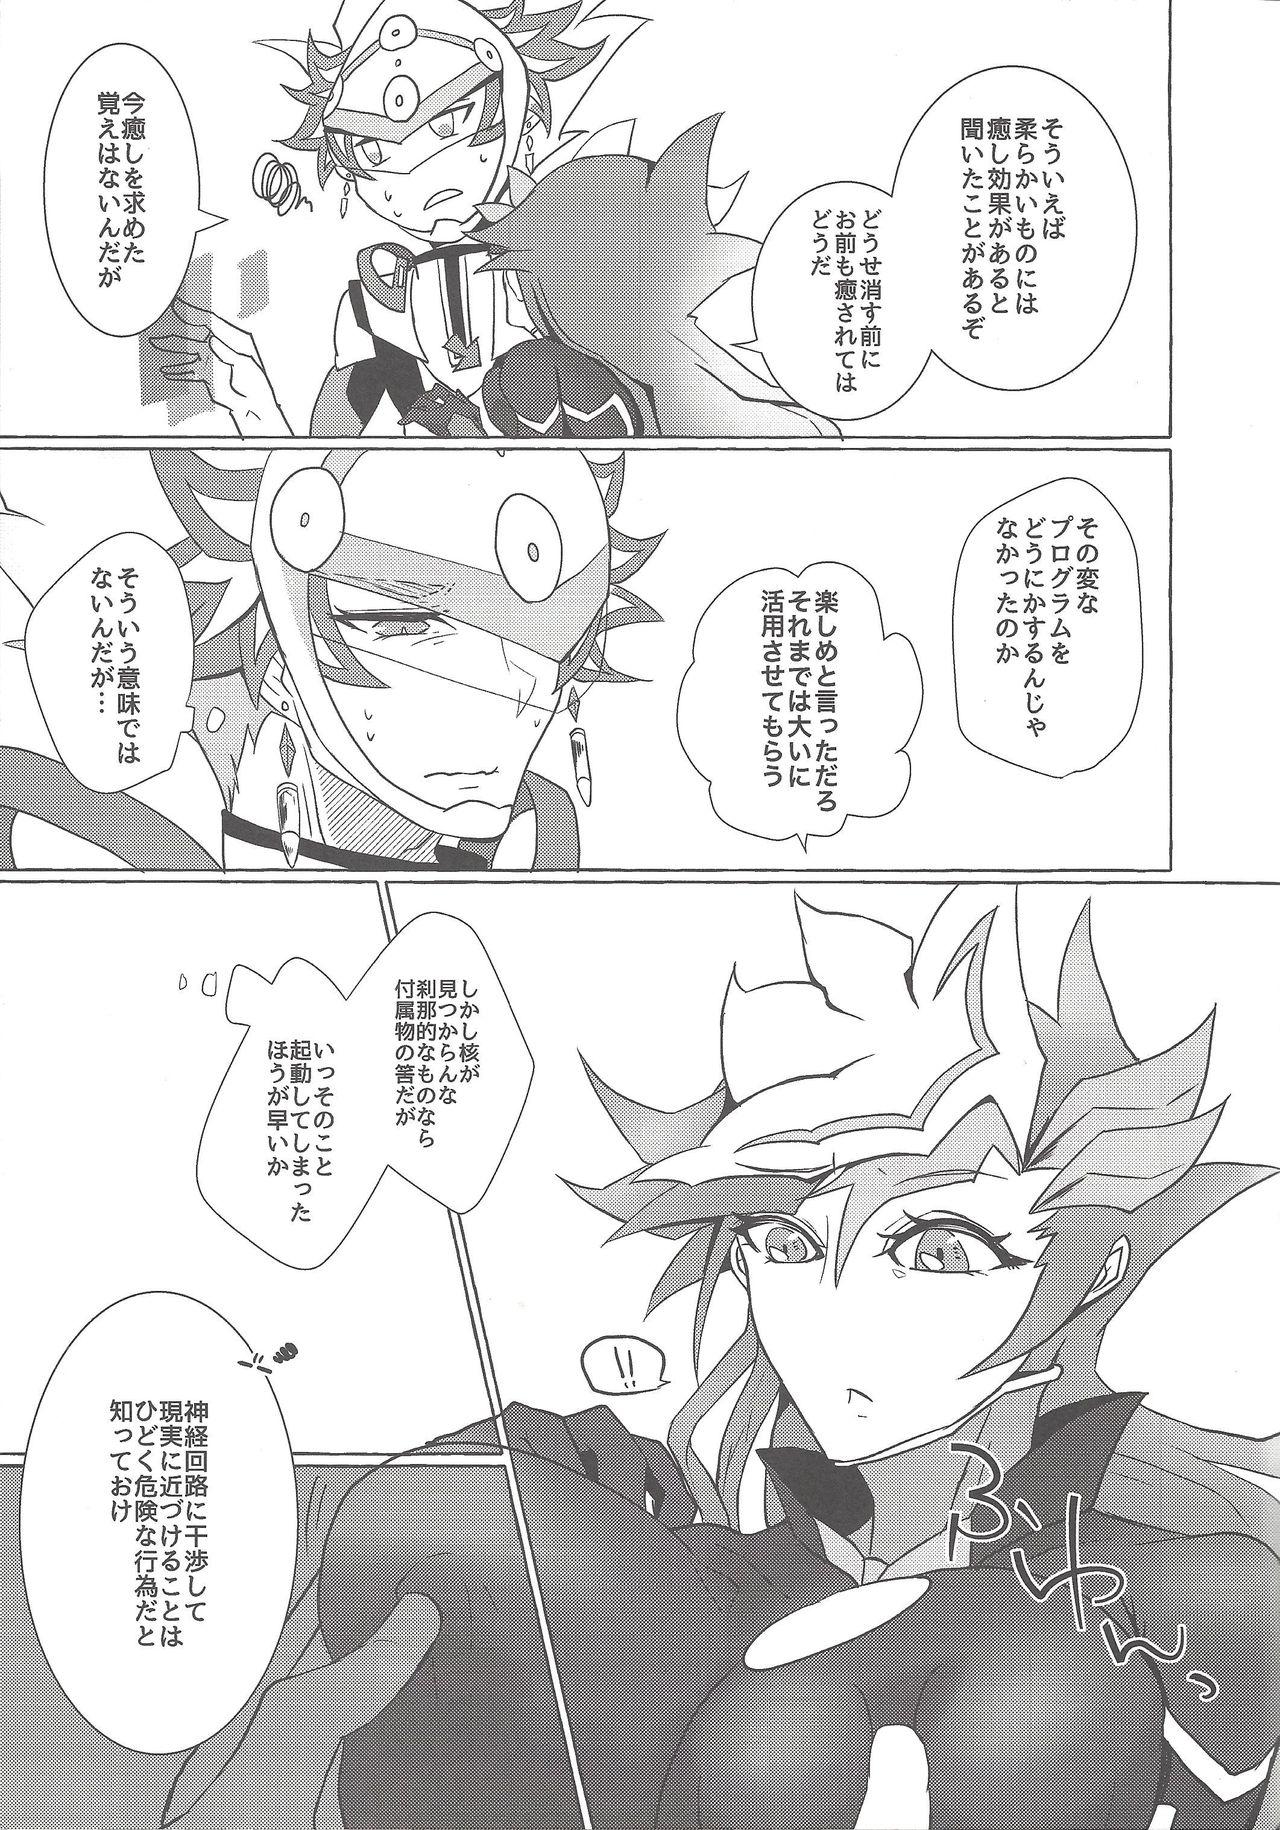 Massage Creep Instant Unreal - Yu gi oh vrains Scandal - Page 8